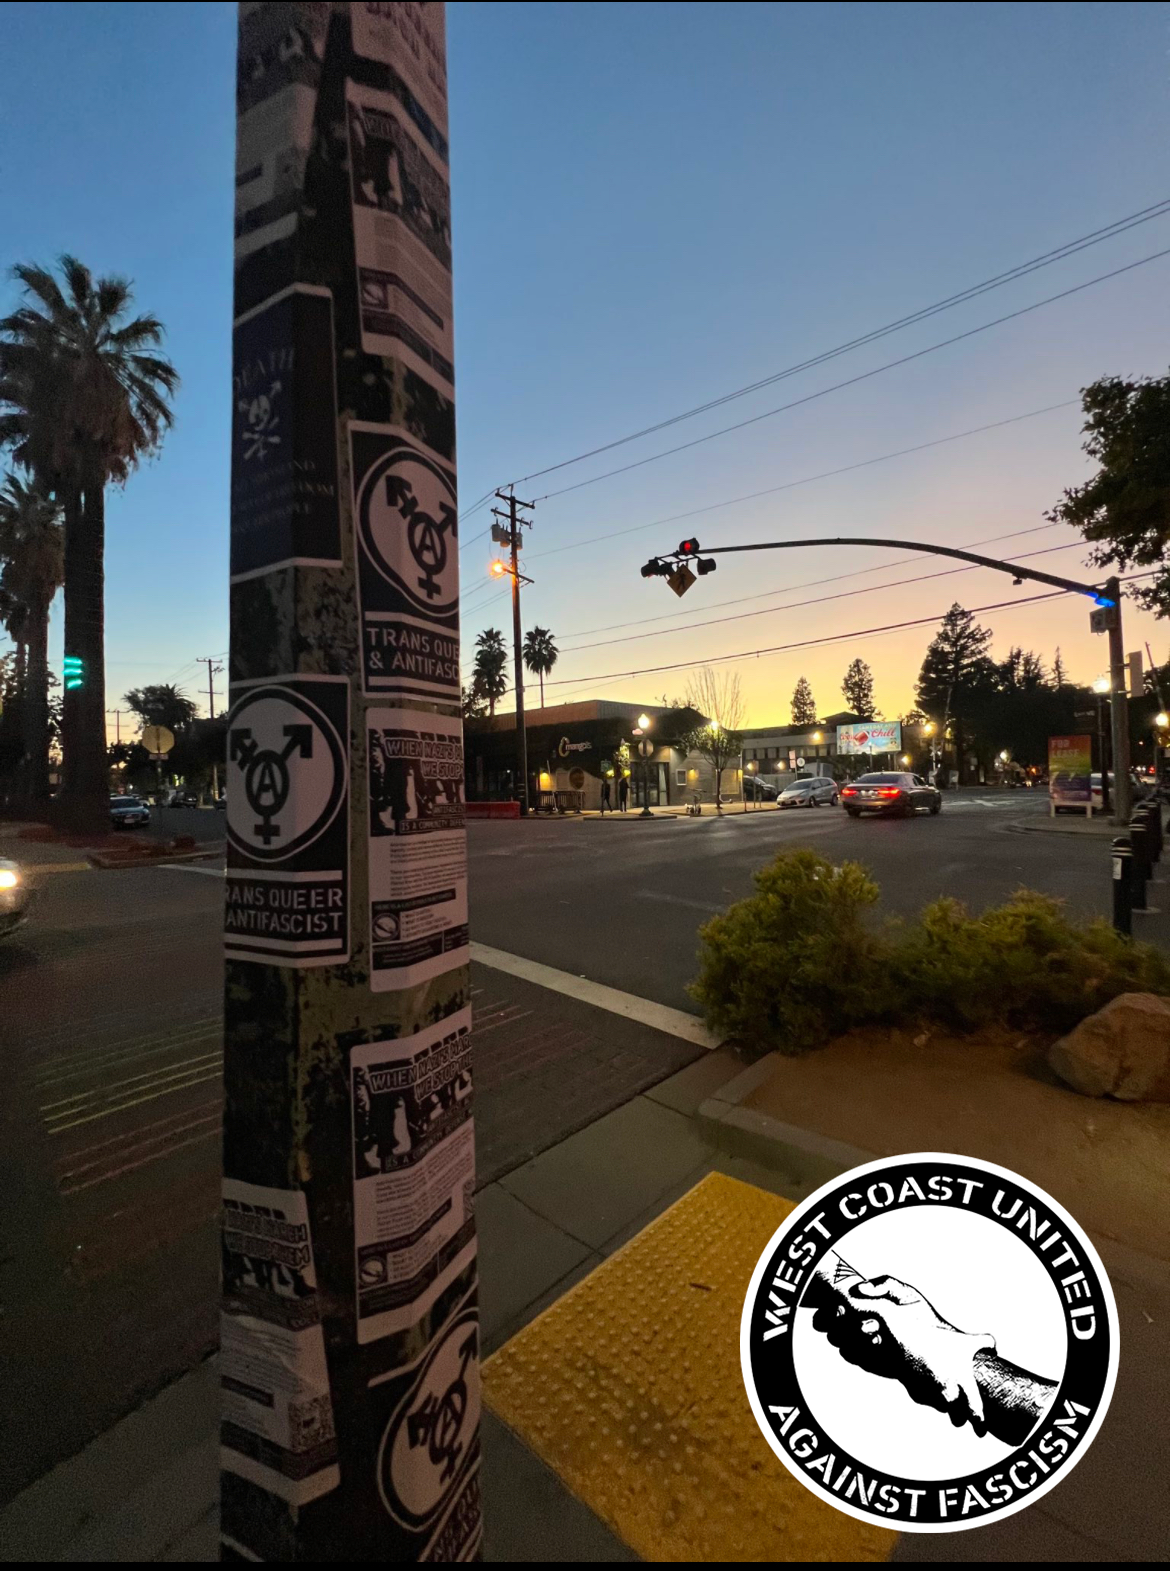 A lamp post sits in the foreground of a city intersection with a setting sun barely glowing in the distance. The metal post is covered in stickers, ranging from a Queer Mahkno, "Trans Queer and Antifascist" with a Transgender Anarchist logo, and flyers issued by West Coast United Against Fascism that has information how to begin antifascist work.